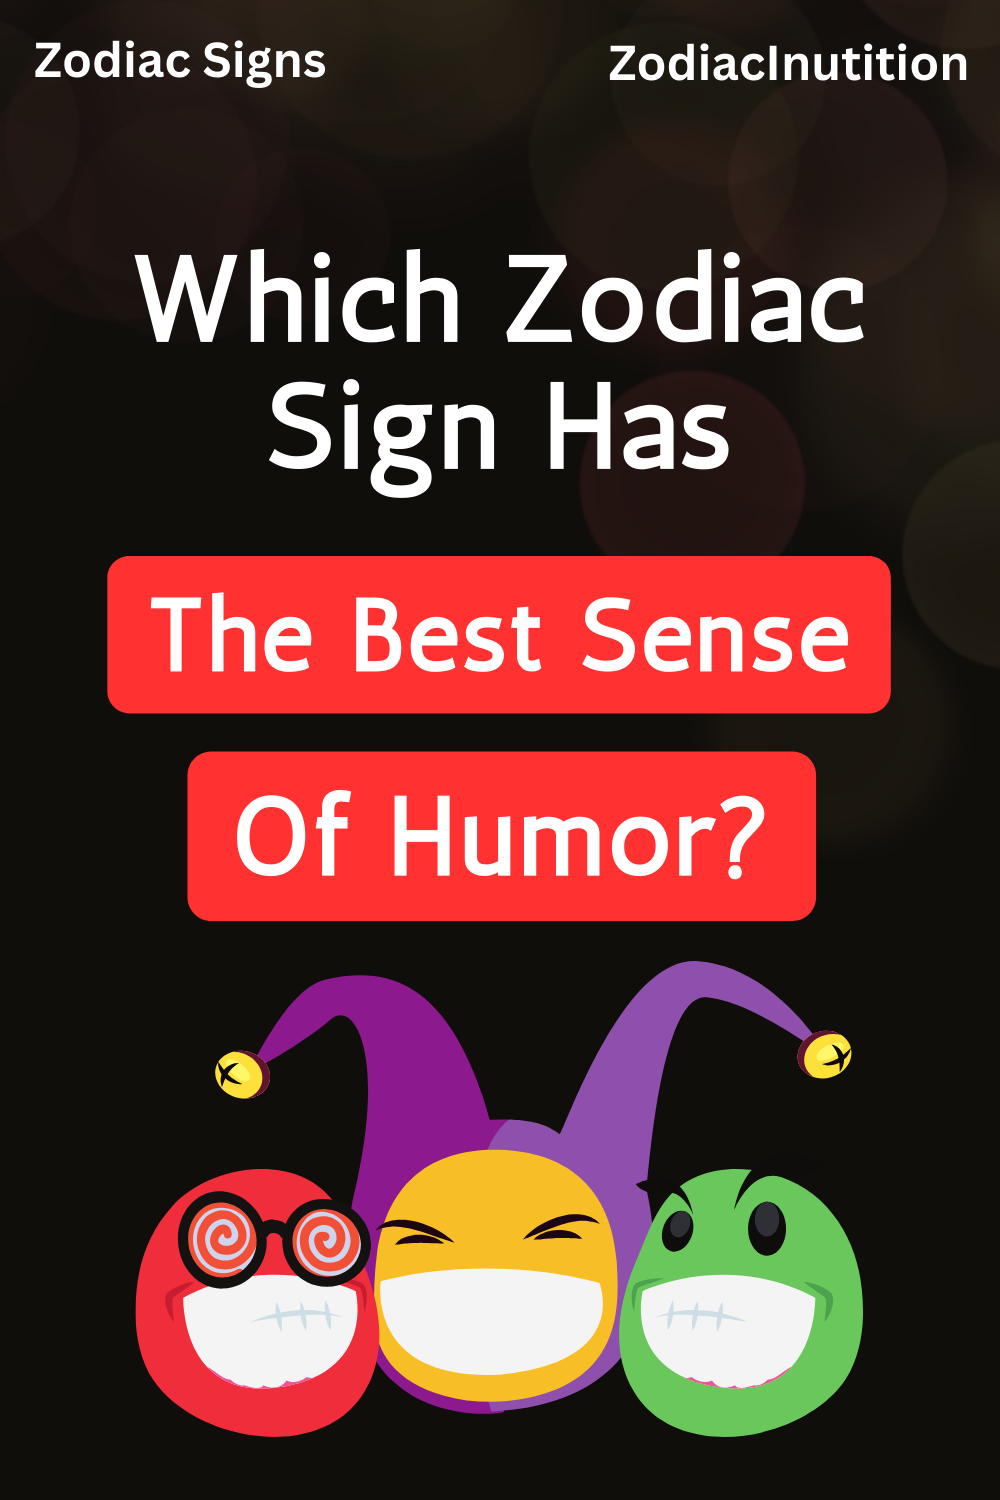 Which Zodiac Sign Has The Best Sense Of Humor?